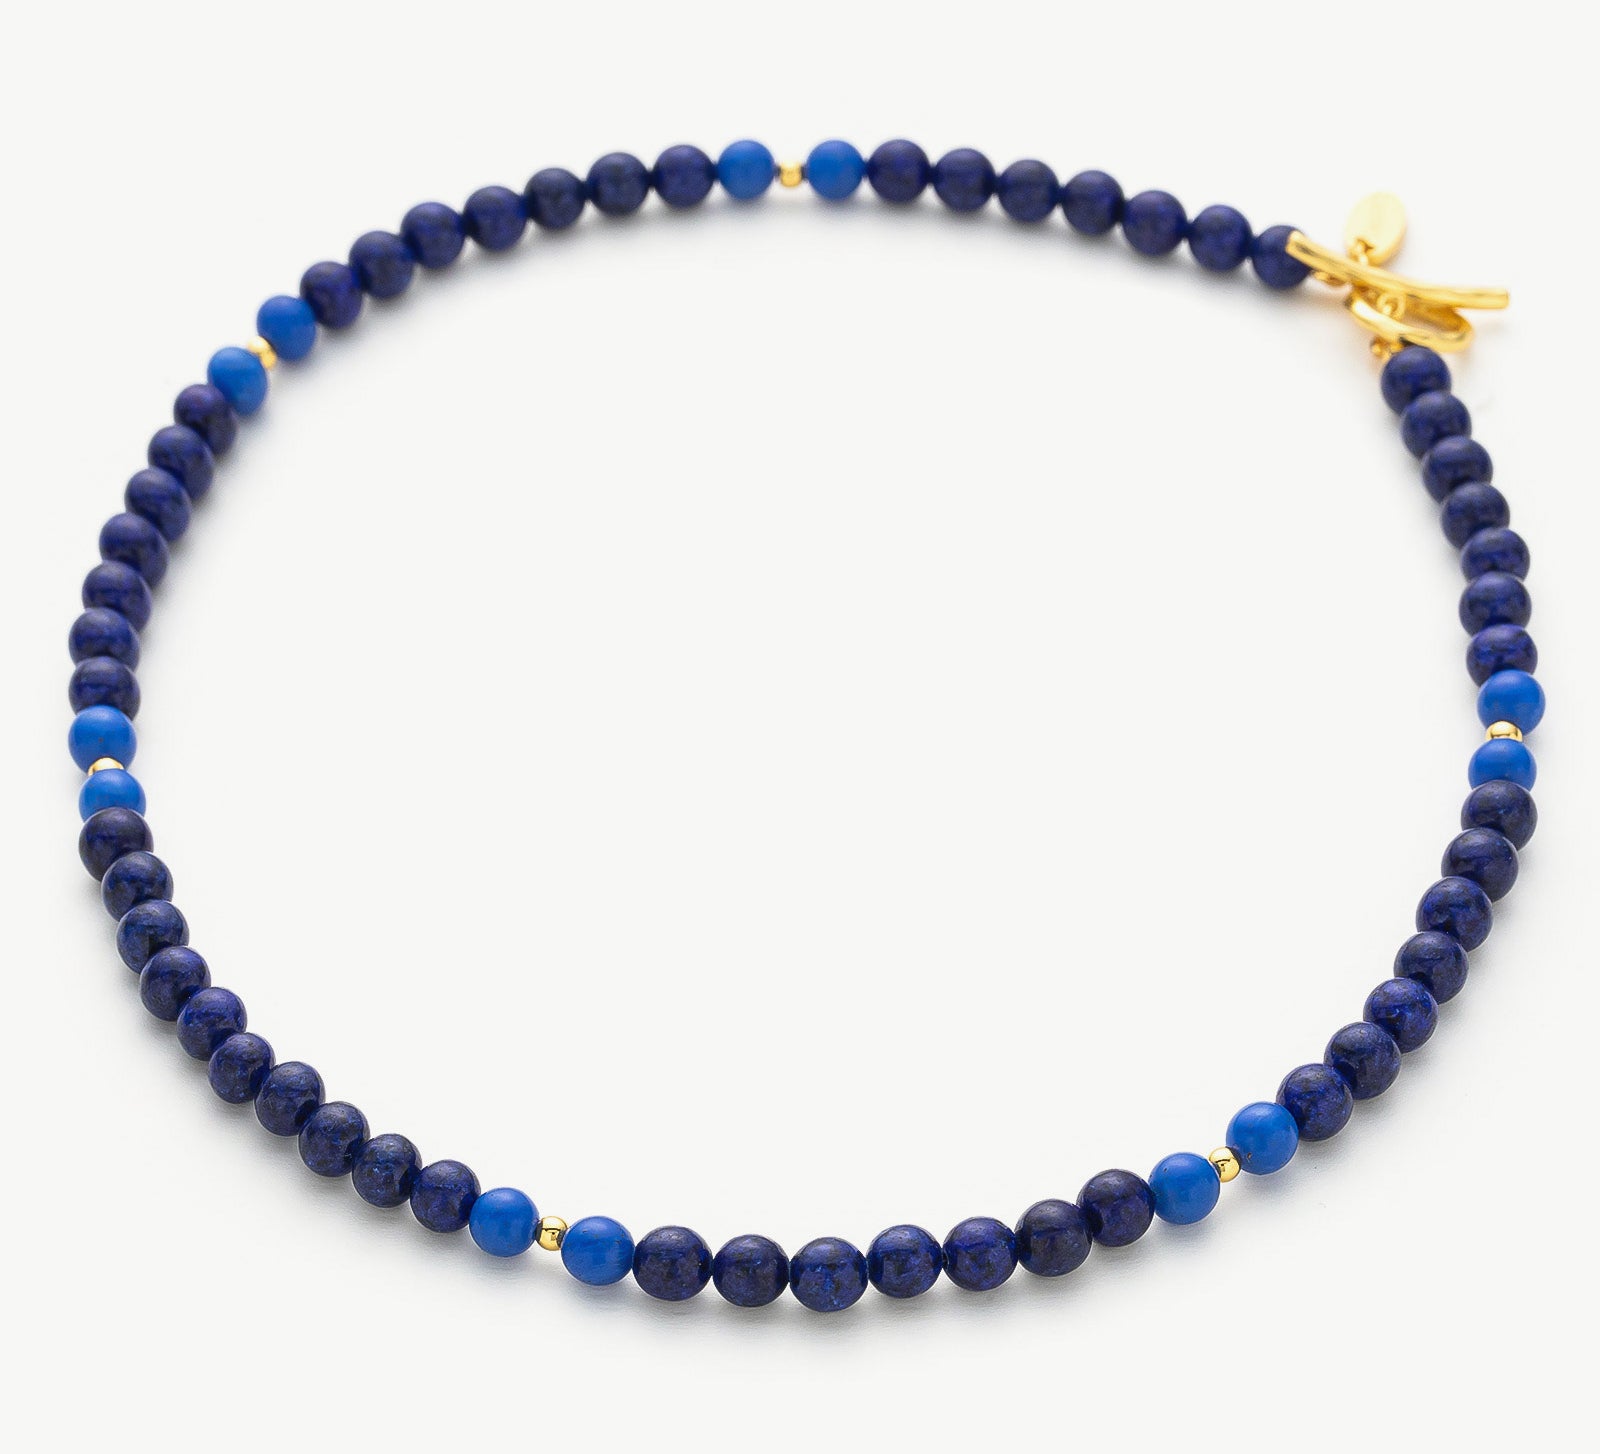 Lapis Blue Necklace, a chic lapis accent that enhances your style, showcasing the rich and vibrant blue tones of lapis lazuli in a stylish pendant for a fashionable statement.